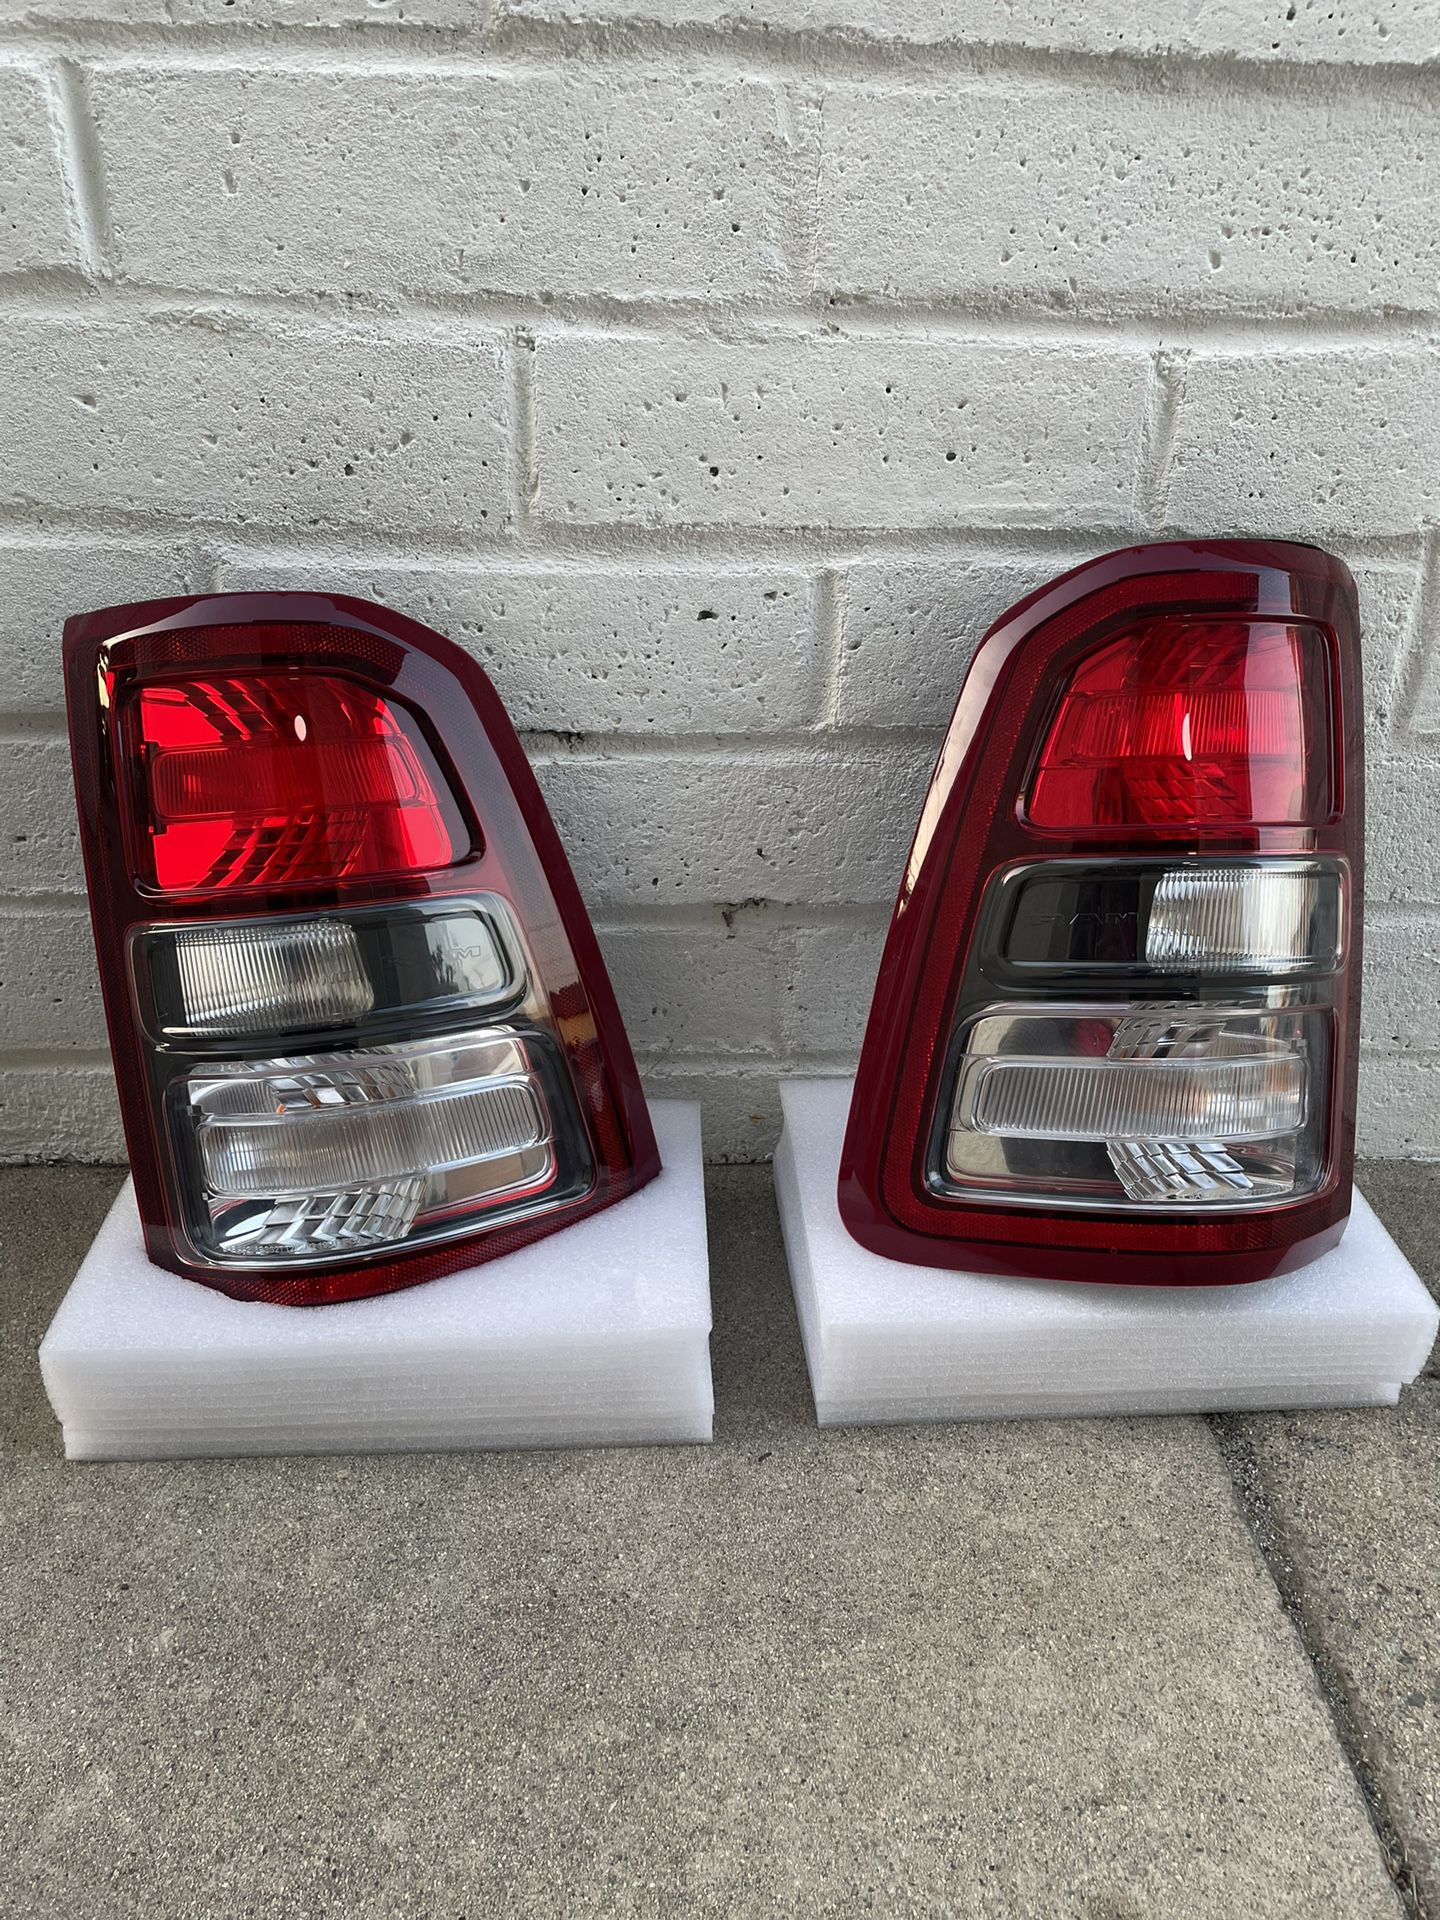 2023 Ram Rear And Front Headlights 